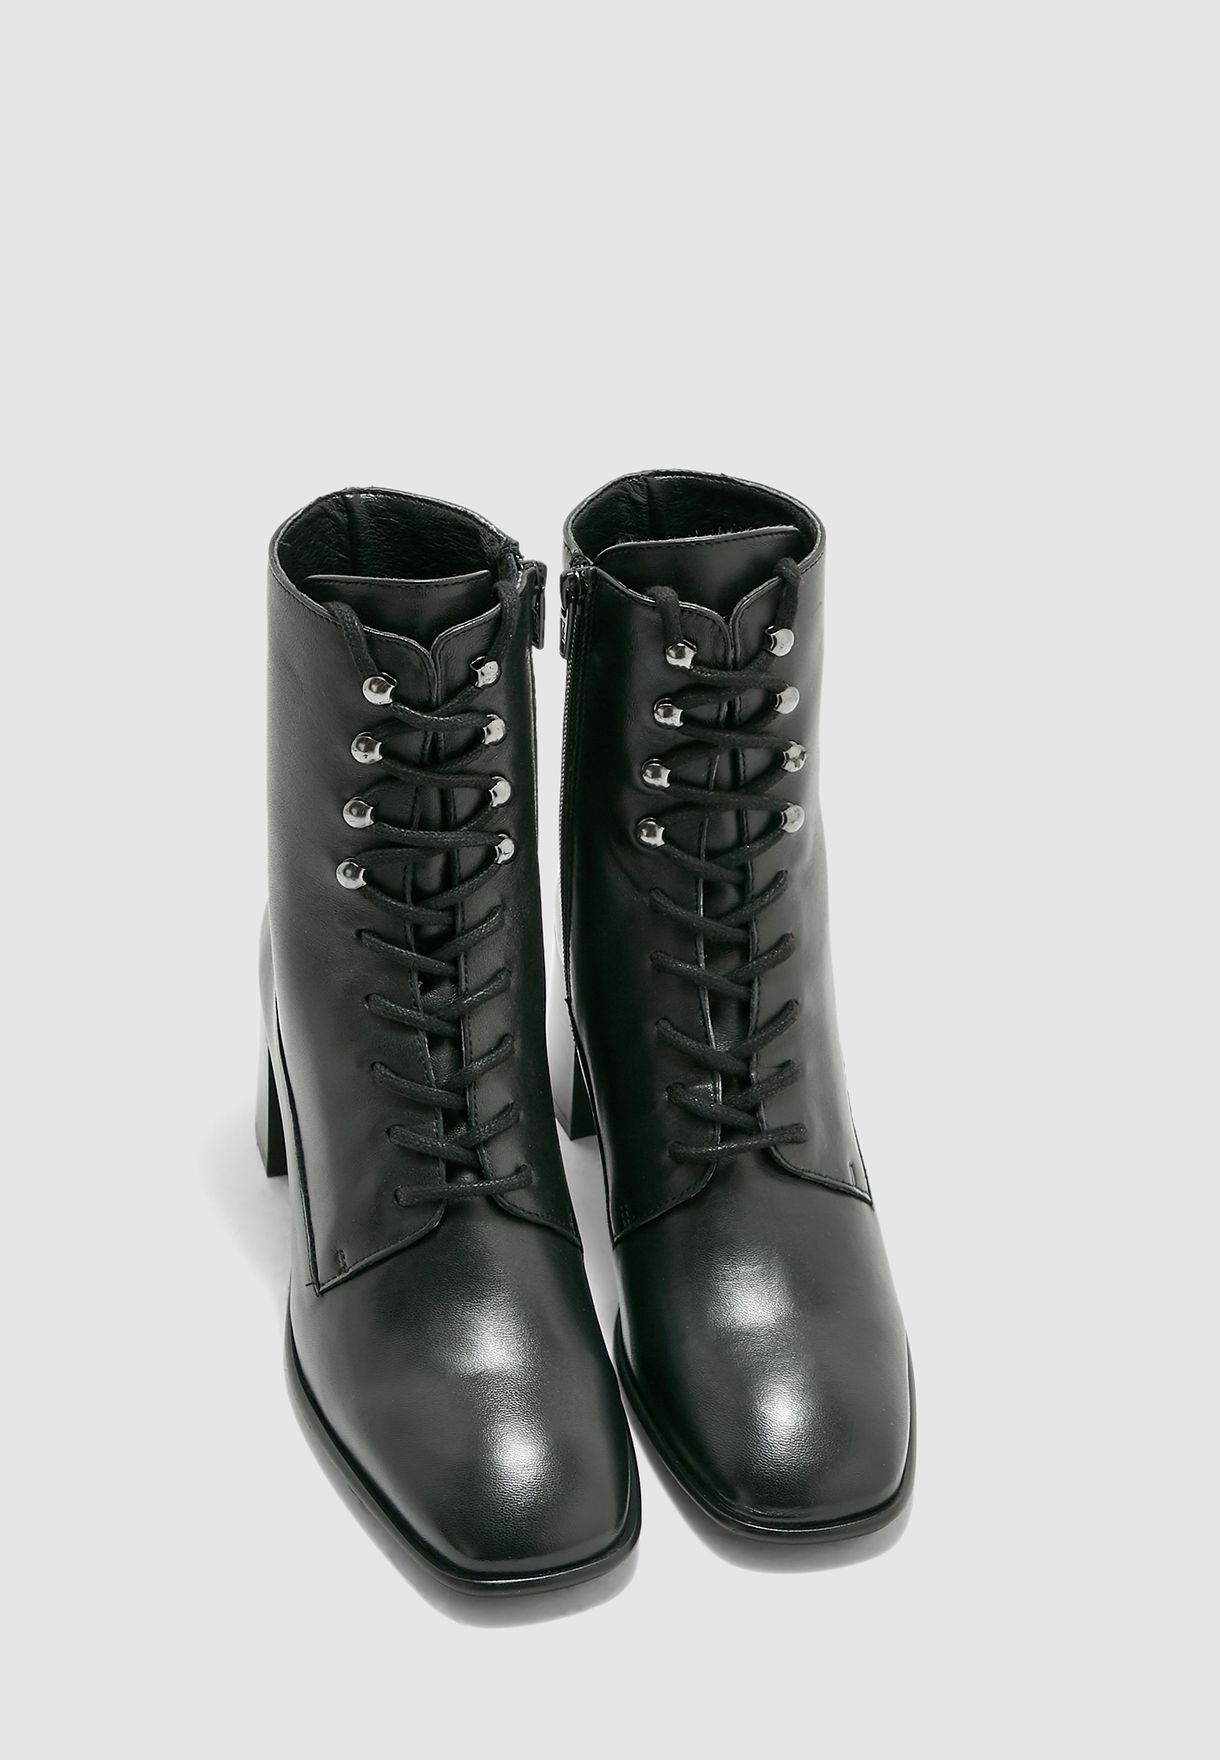 miista lace up boots